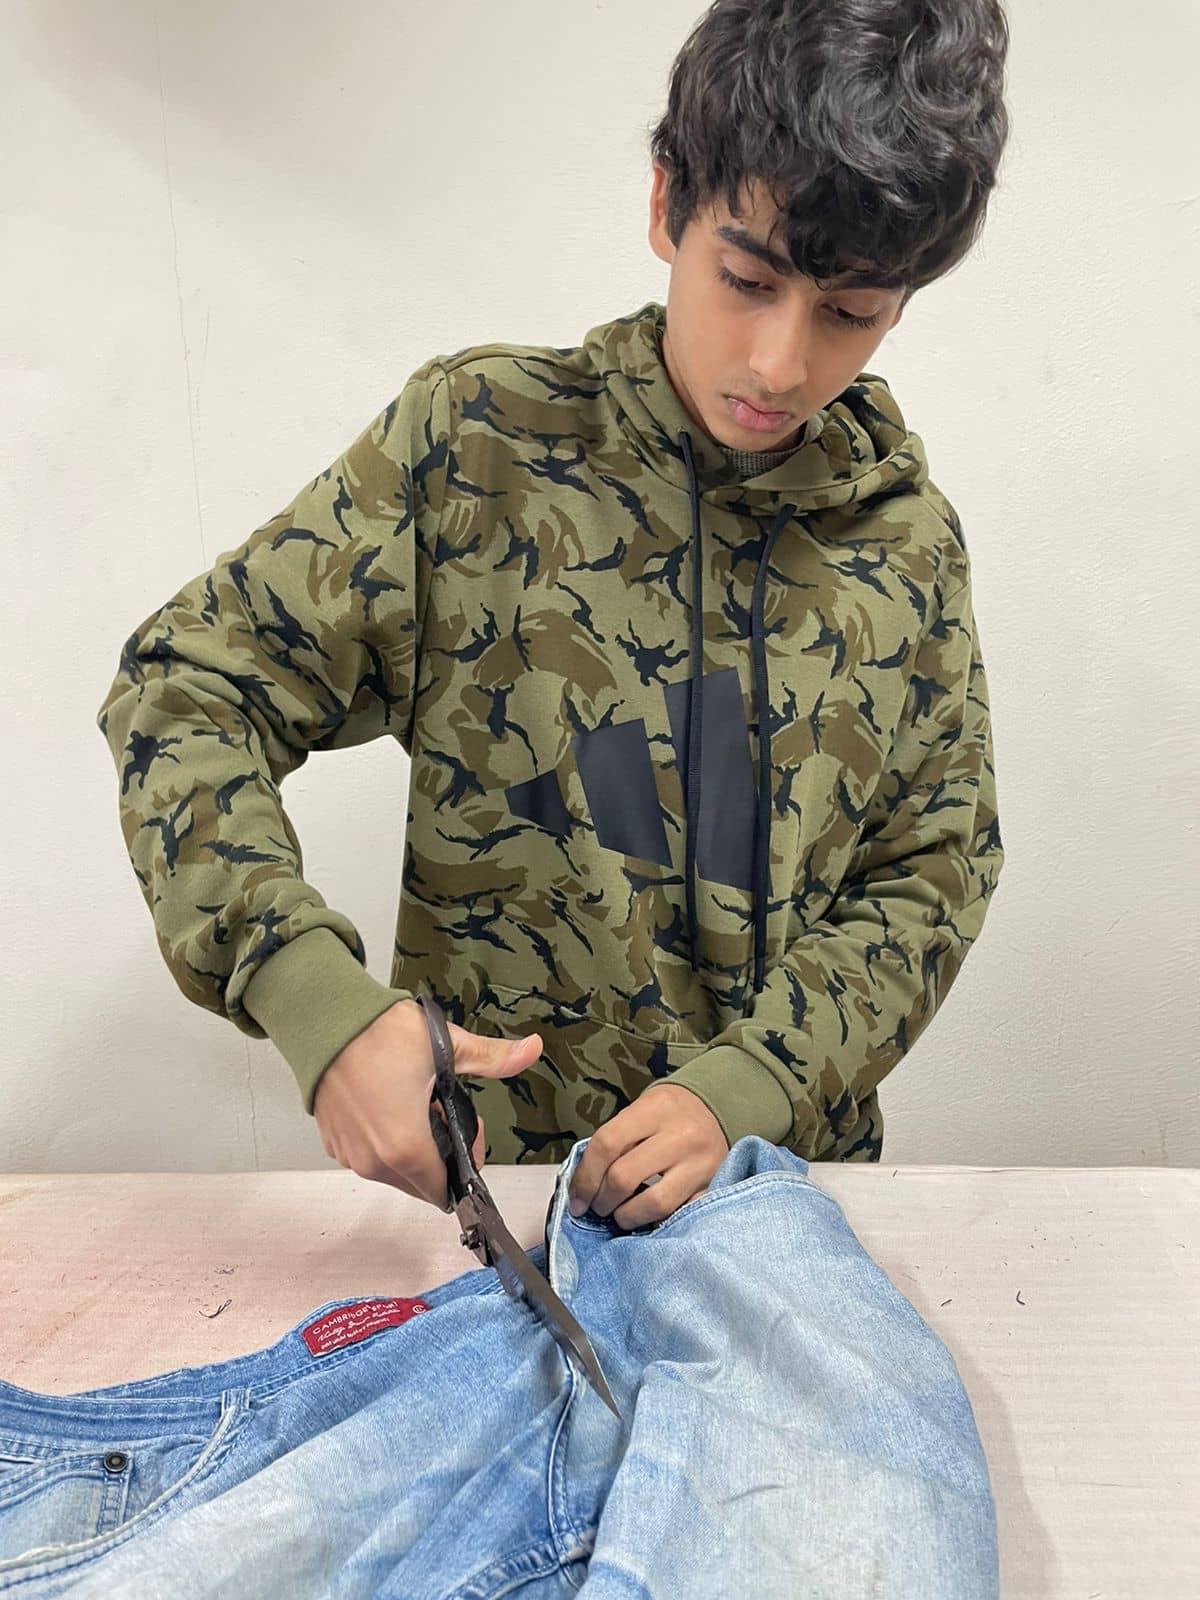 Nirvaan started Project Jeans in 2022 to provide warmth to the homeless